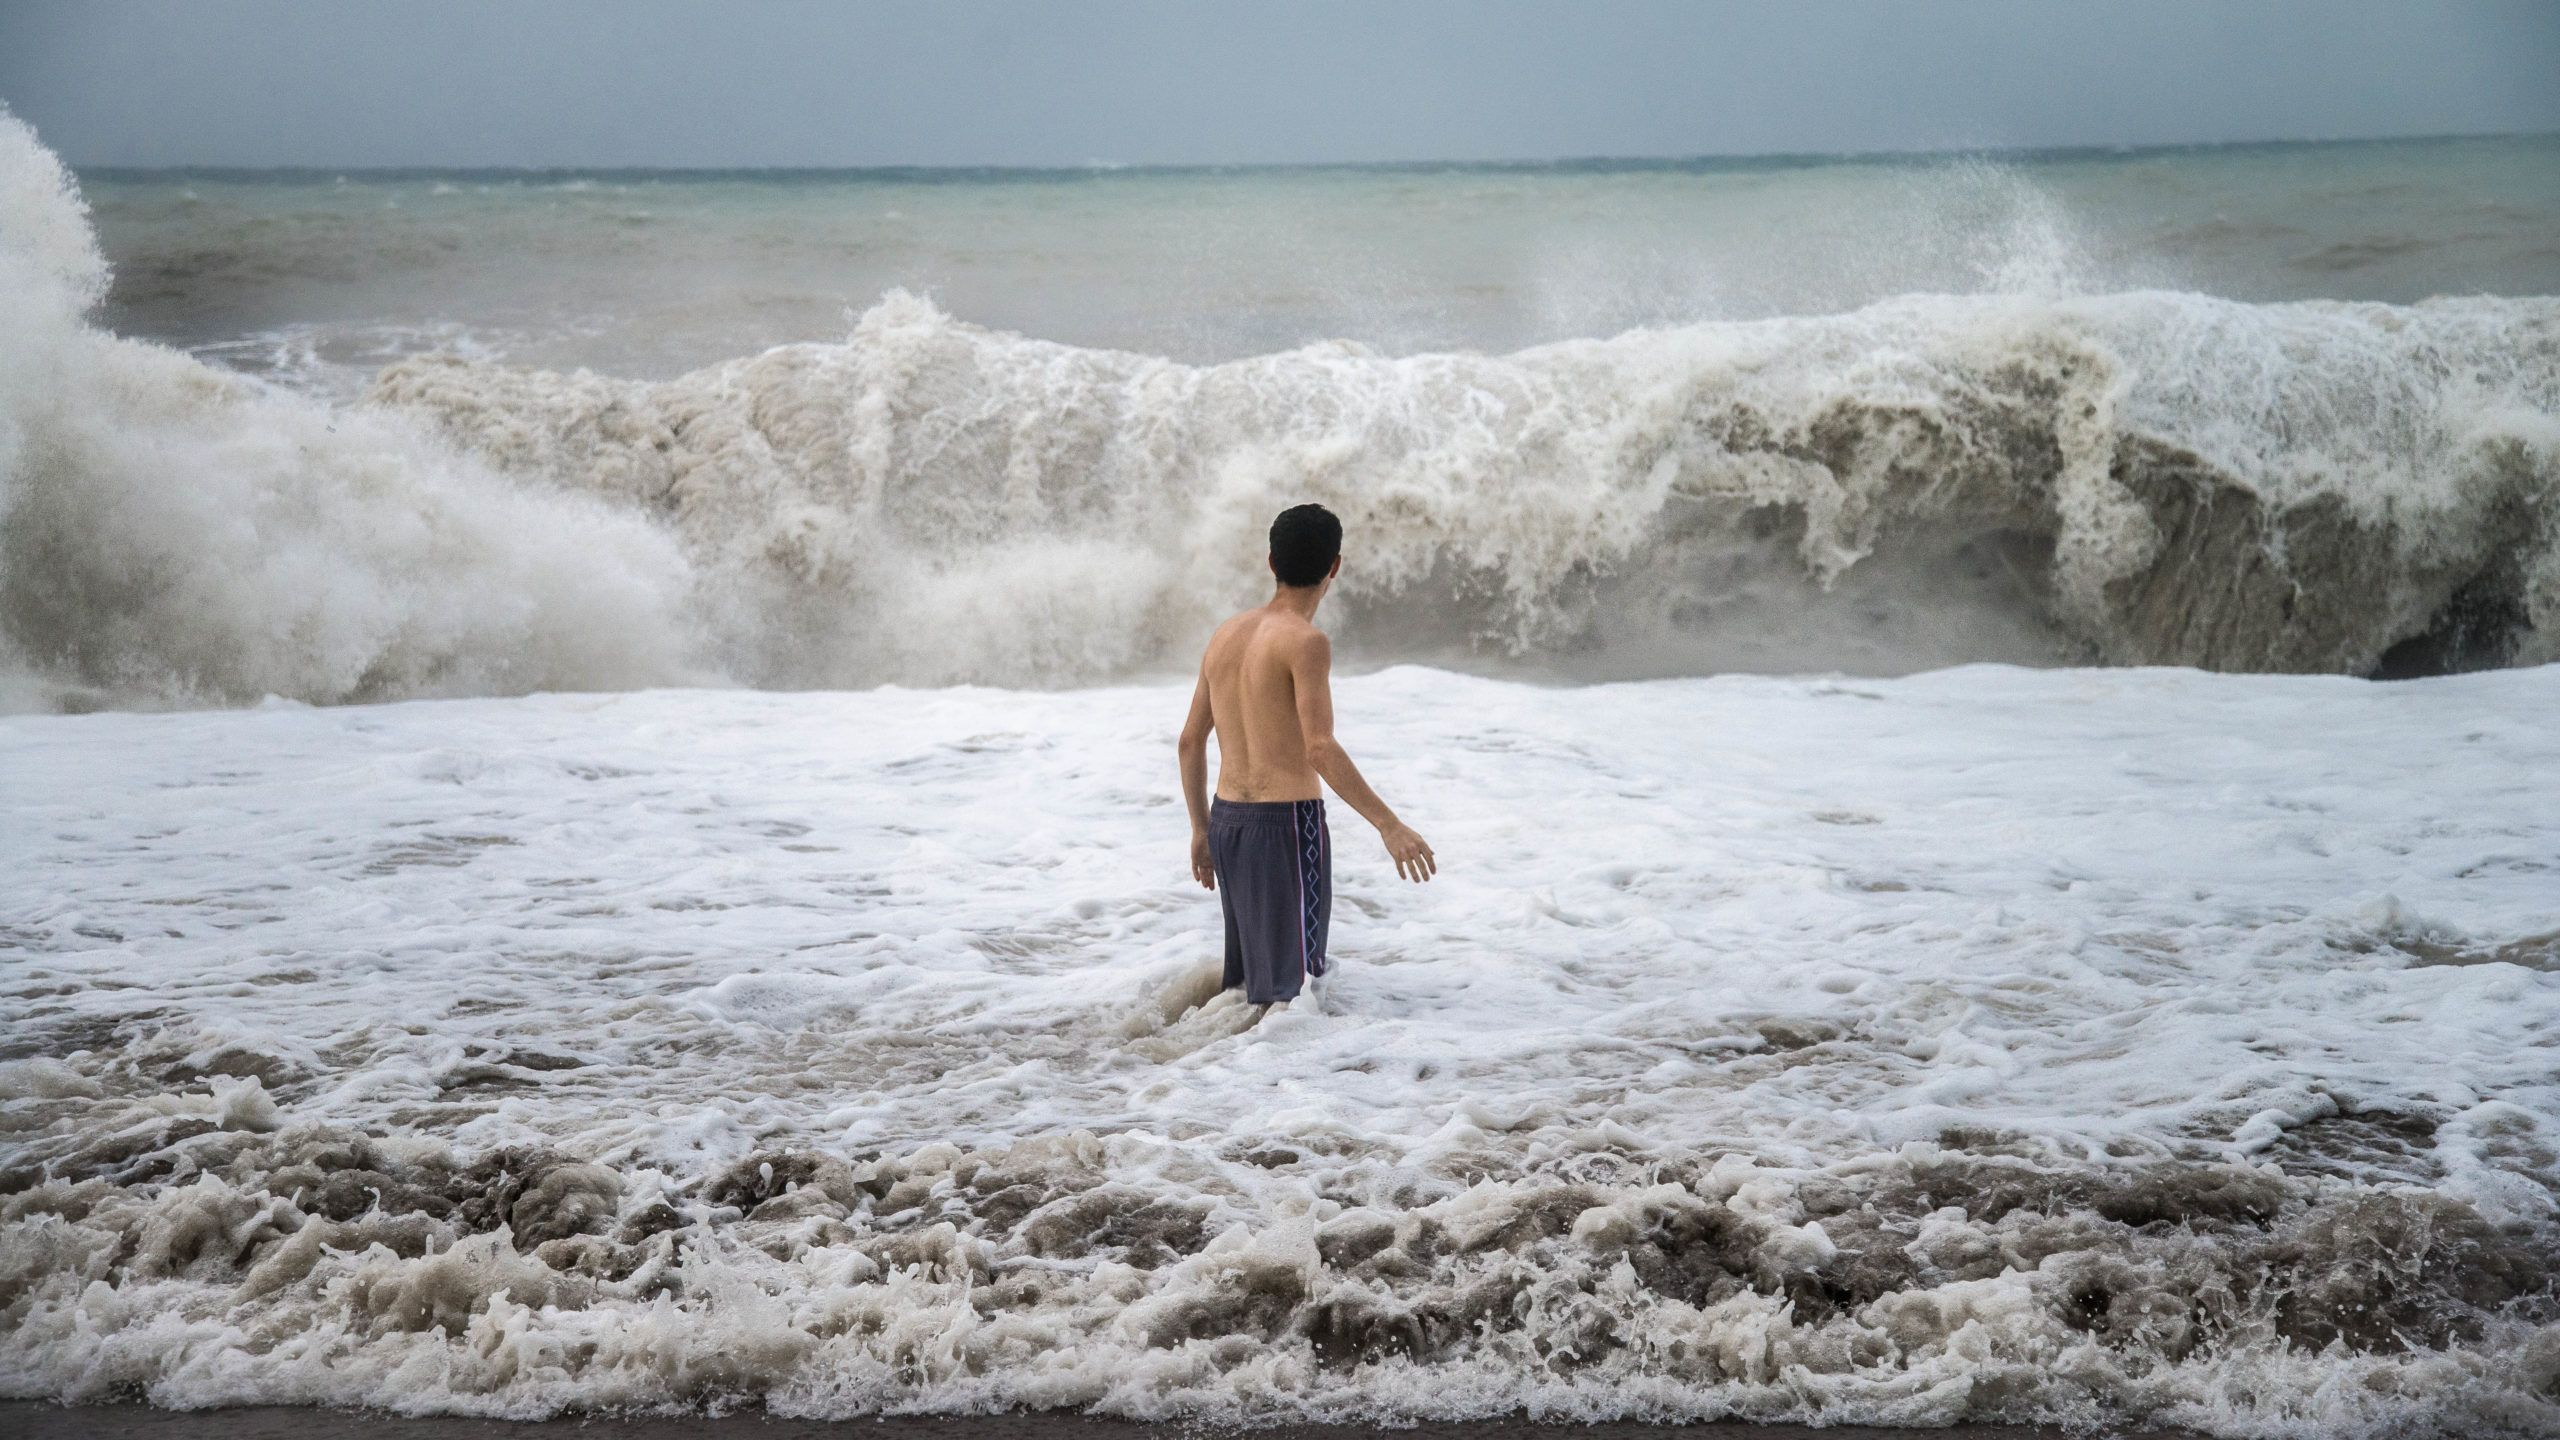 Antalya - Turkey - October 17, 2013: Young man standing against the sea waves with splash in a cloudy storm weather